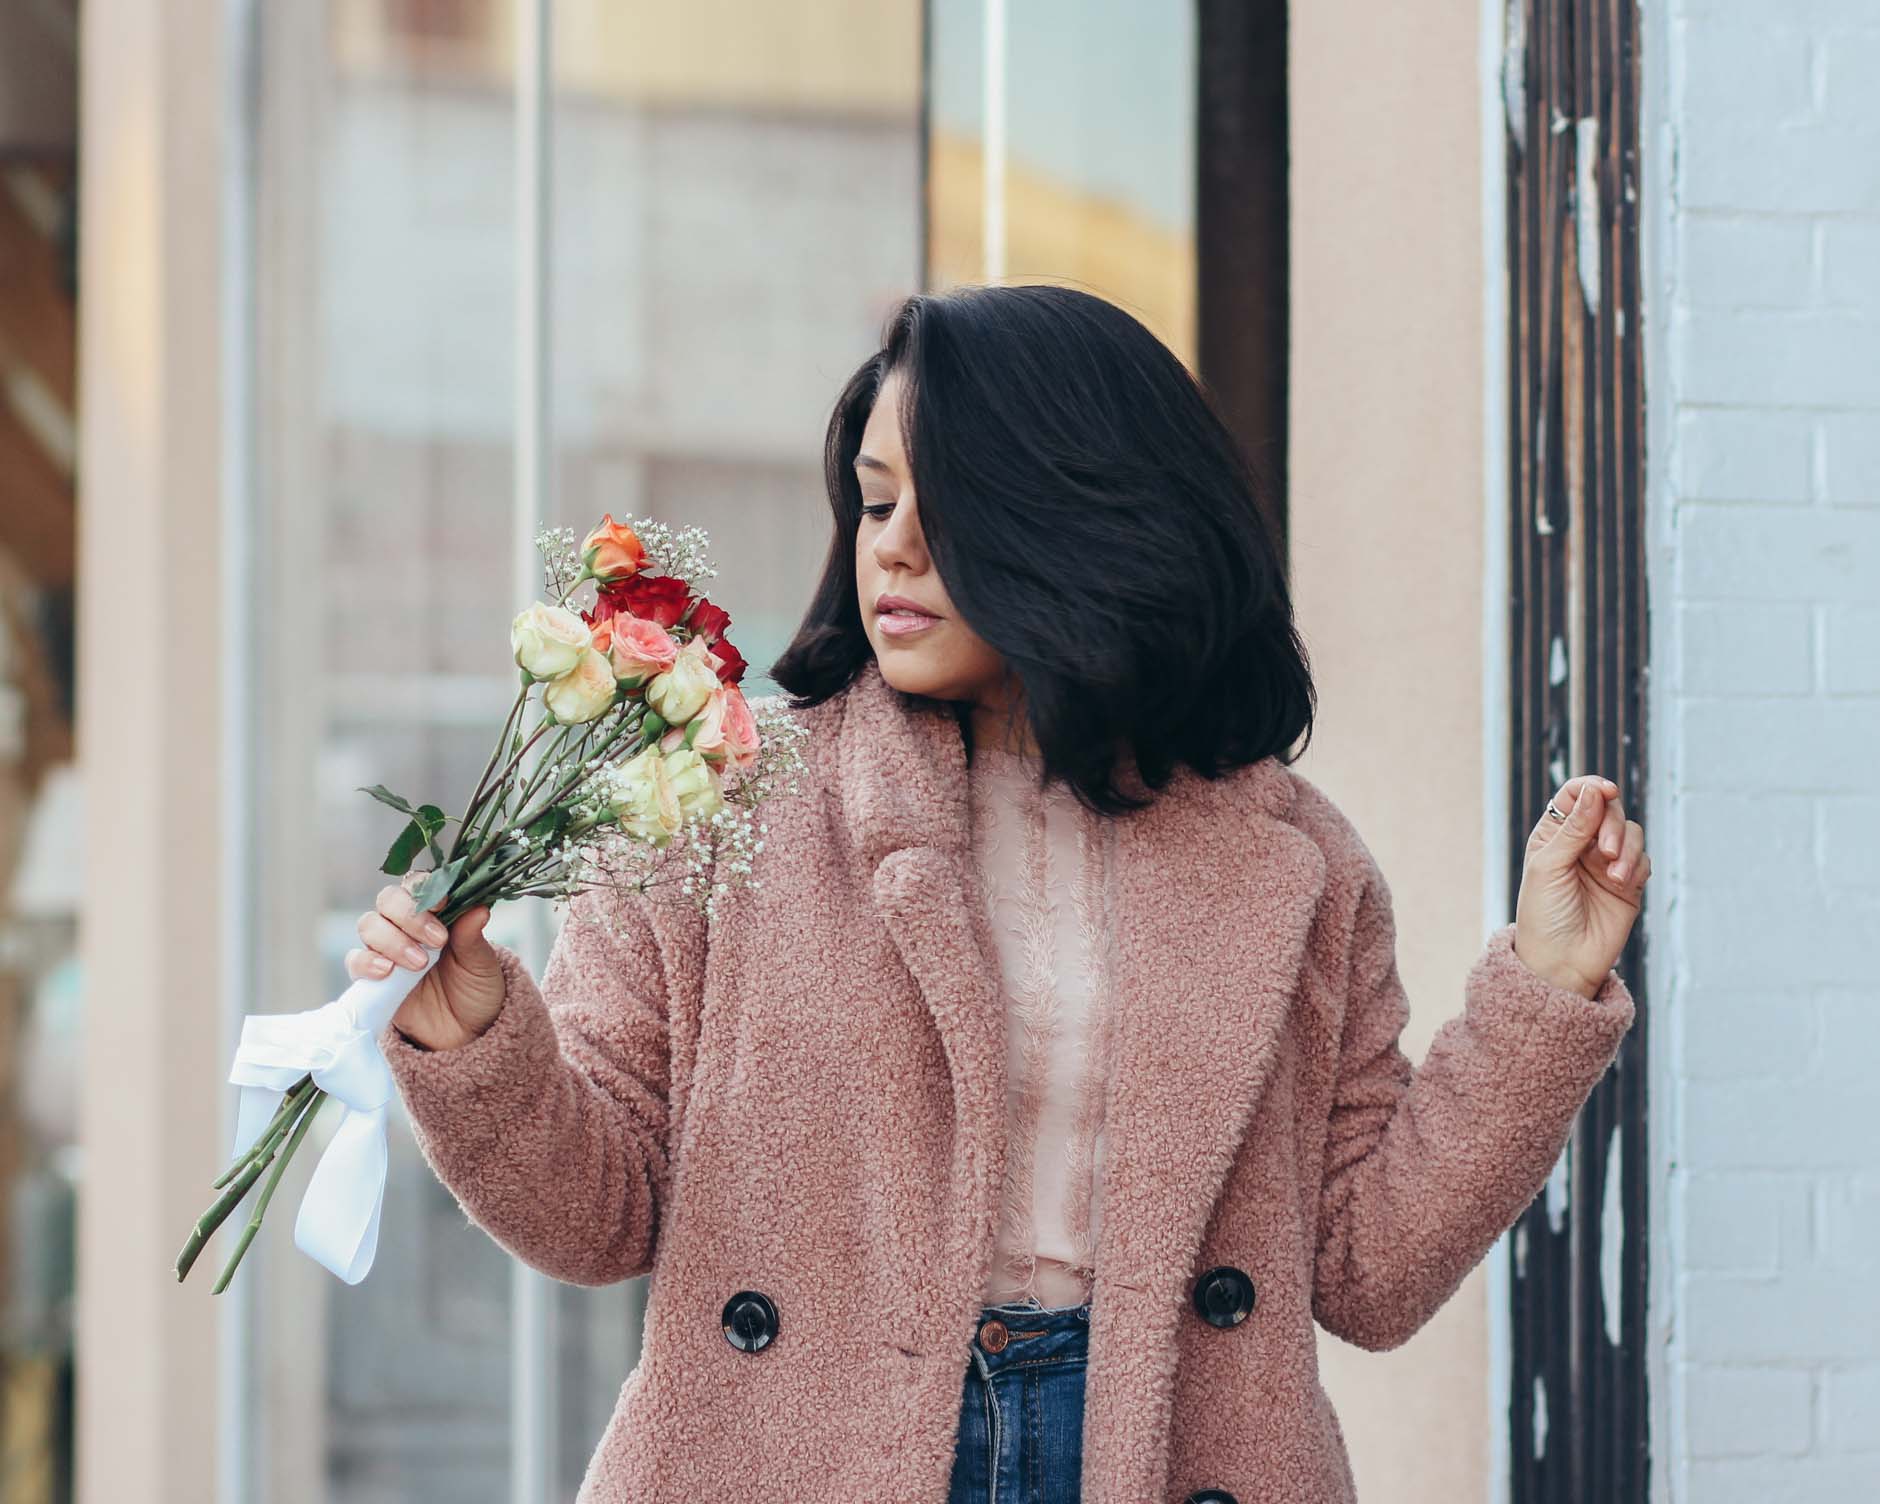 lifestyle blogger naty michele wearing a teddy coat and holding roses 